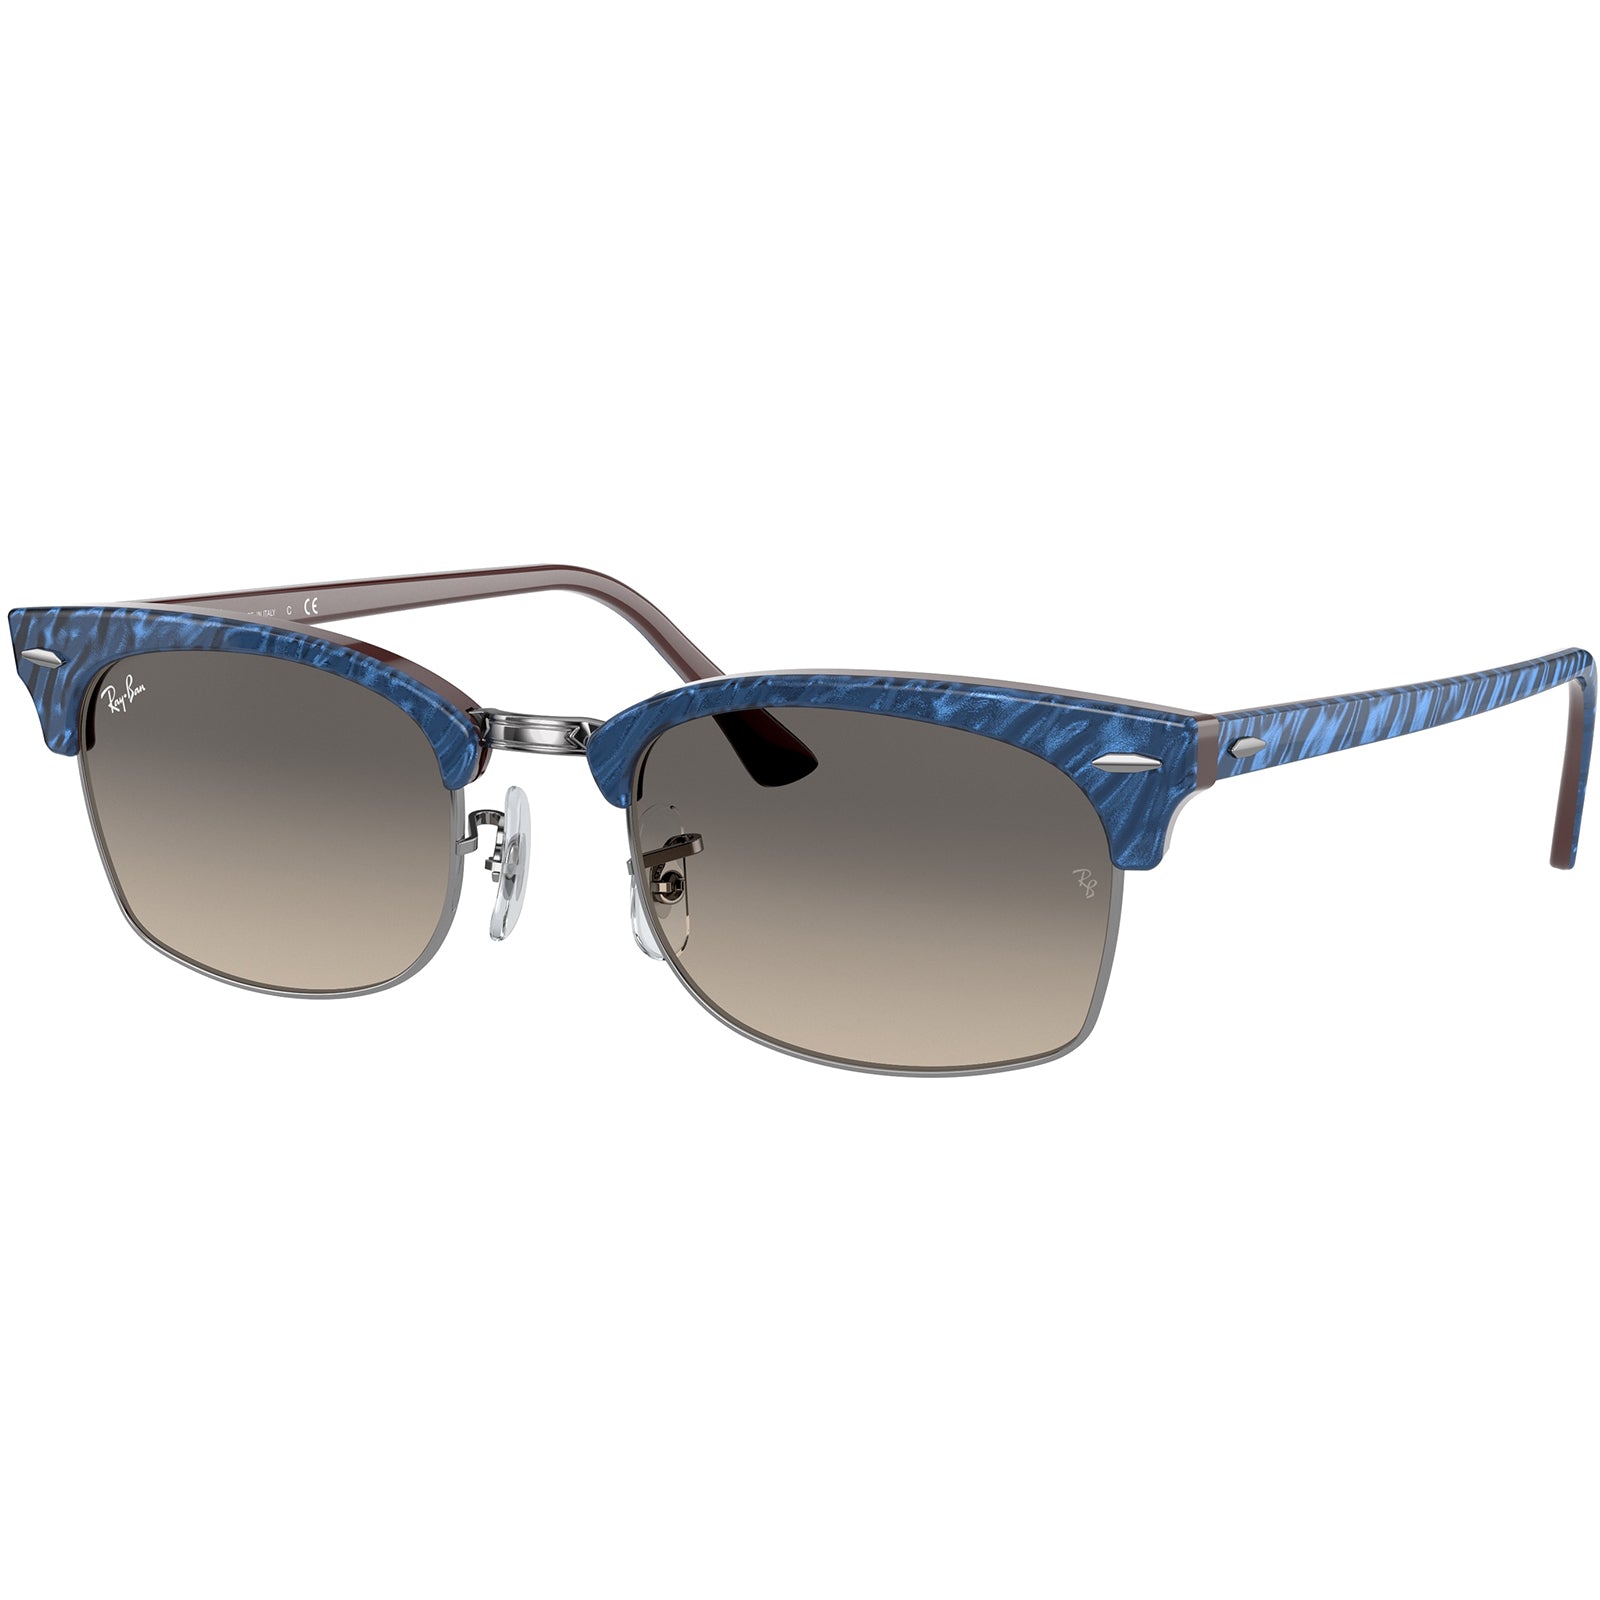 Ray-Ban Clubmaster Square Adult Lifestyle Sunglasses-0RB3916F